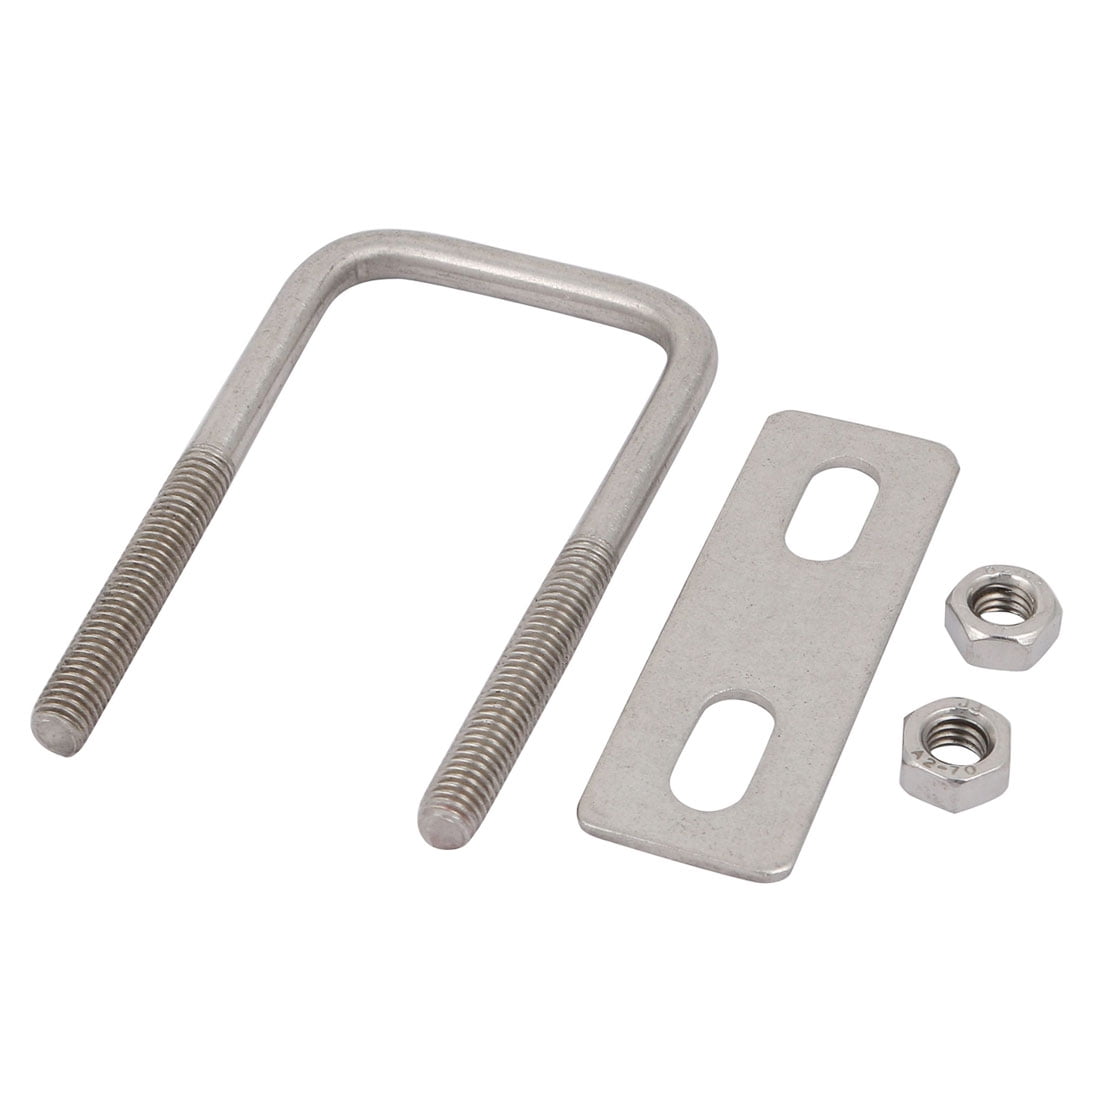 Frame Plate 2 Set Square U-Bolts Carbon Steel M6 with Nuts Round Washers